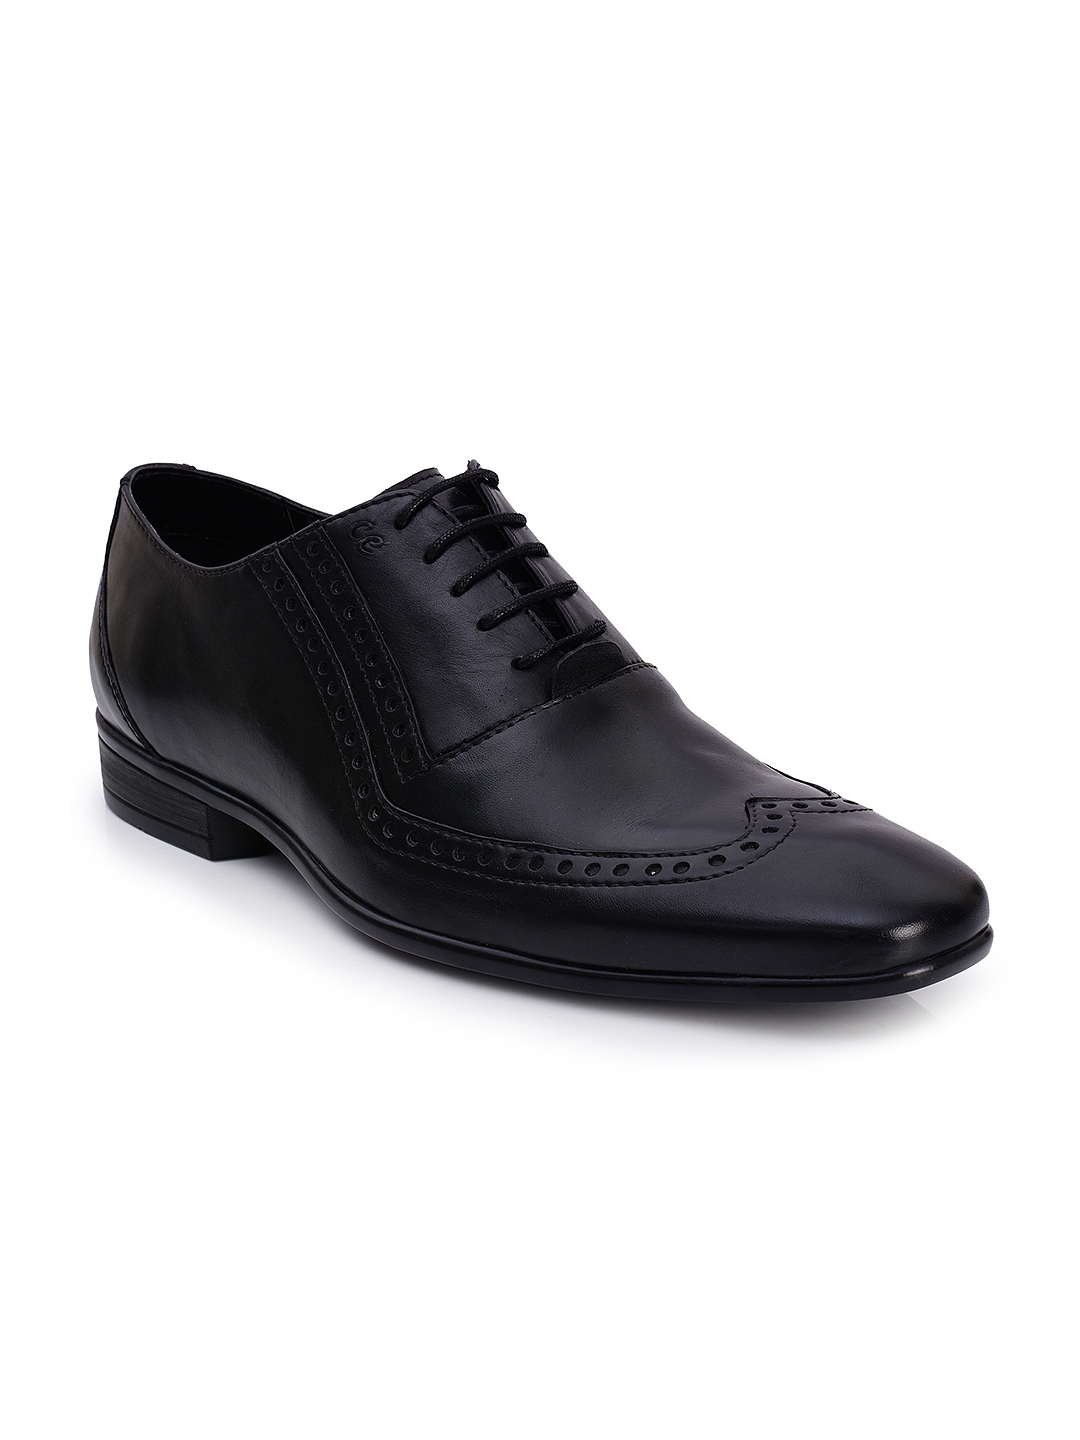 Buy CORE ESPANA Men Black Genuine Leather Brogues - Formal Shoes for ...